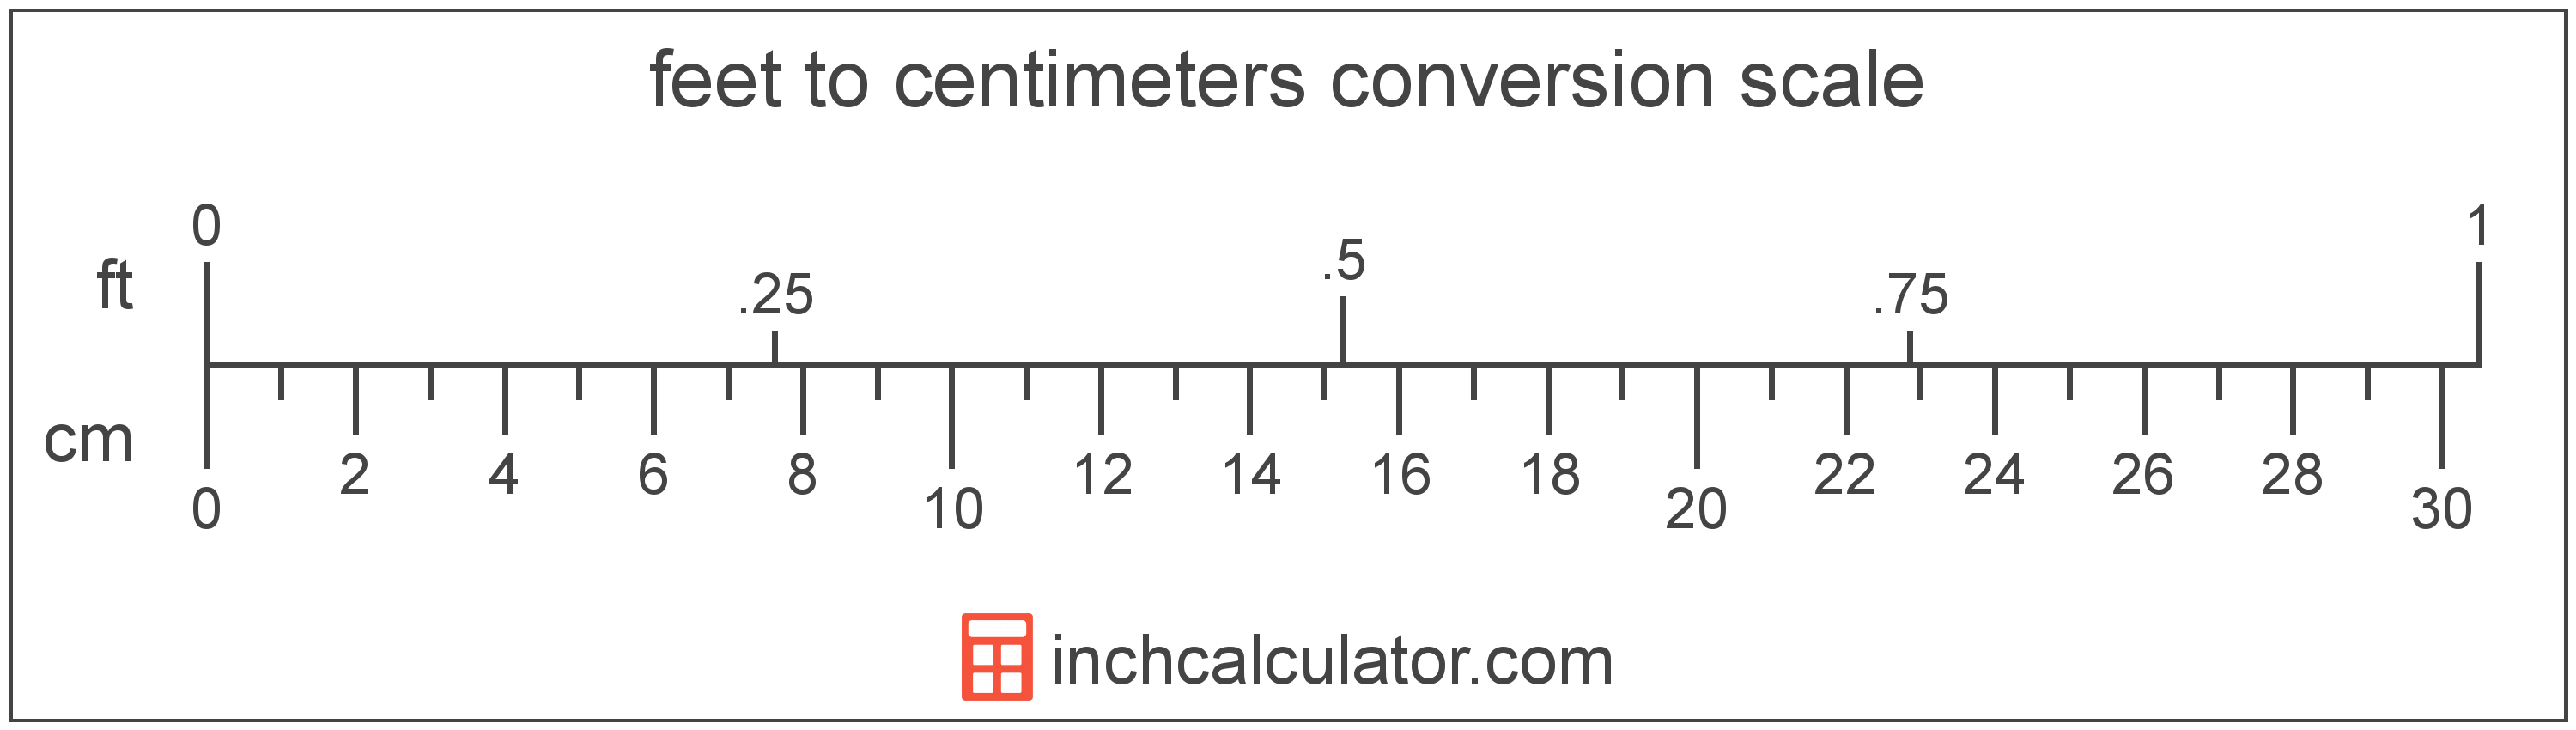 conversion scale showing feet and equivalent centimeters length values